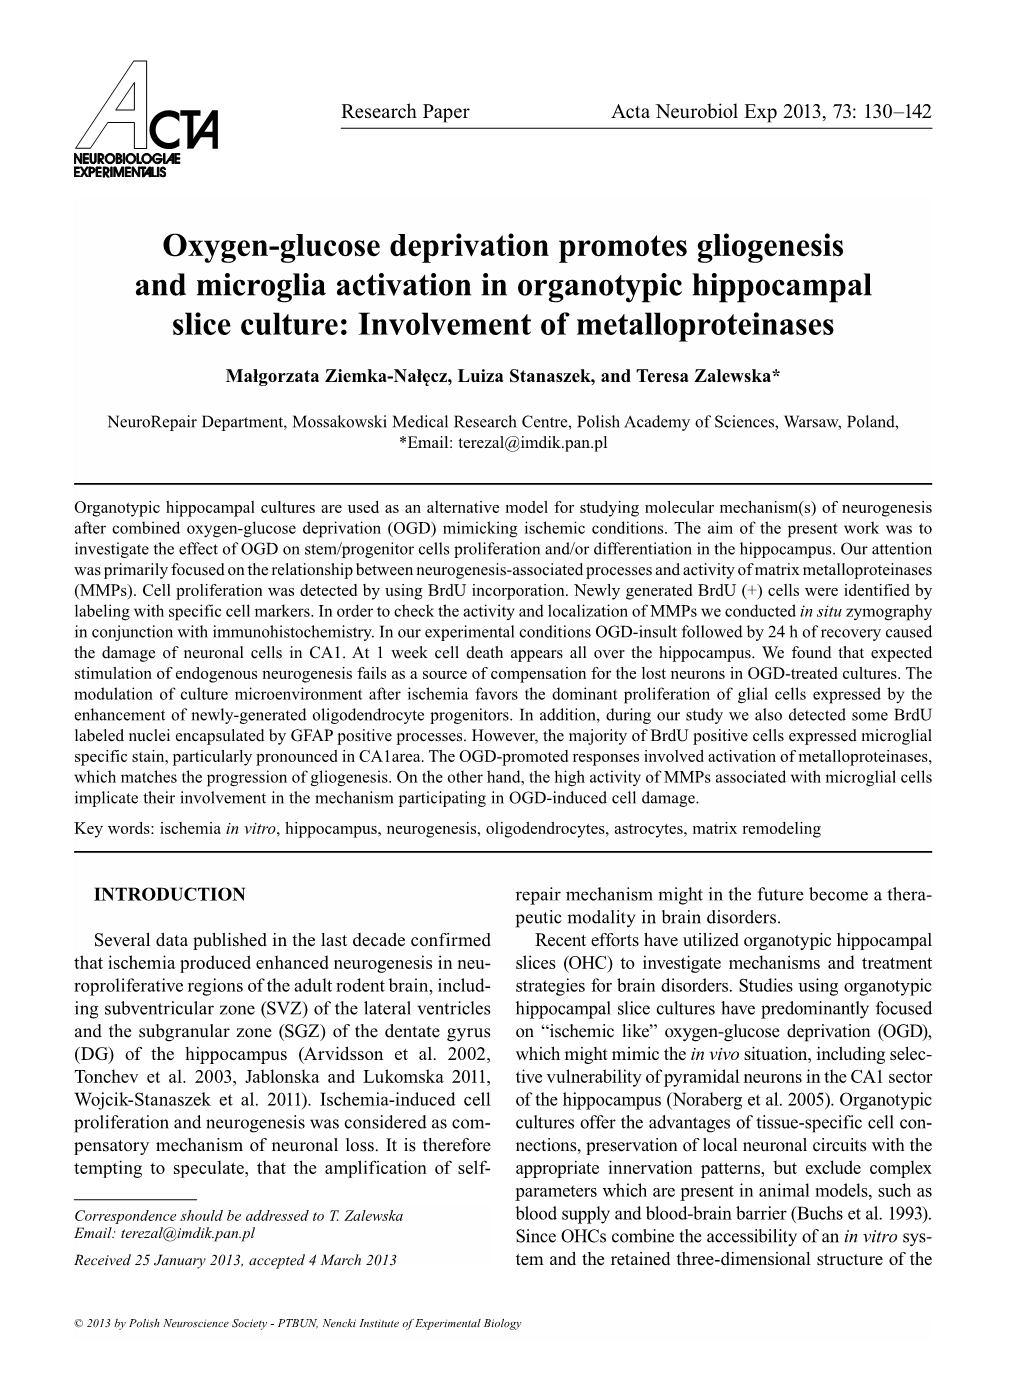 Oxygen-Glucose Deprivation Promotes Gliogenesis and Microglia Activation in Organotypic Hippocampal Slice Culture: Involvement of Metalloproteinases